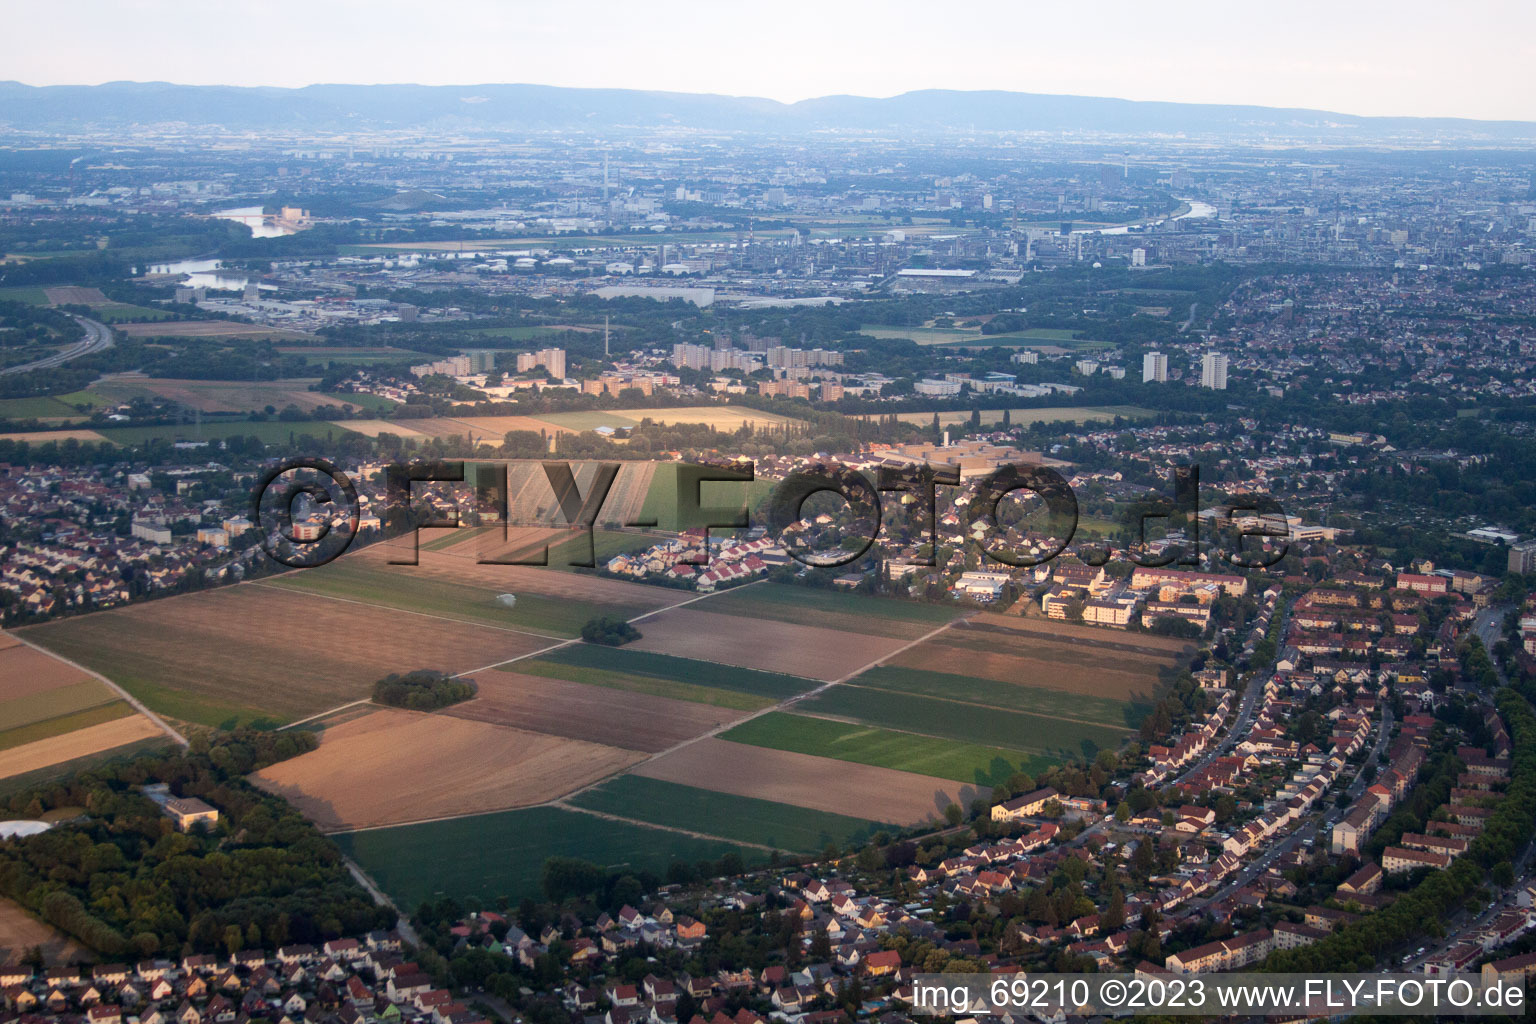 Frankenthal in the state Rhineland-Palatinate, Germany seen from a drone